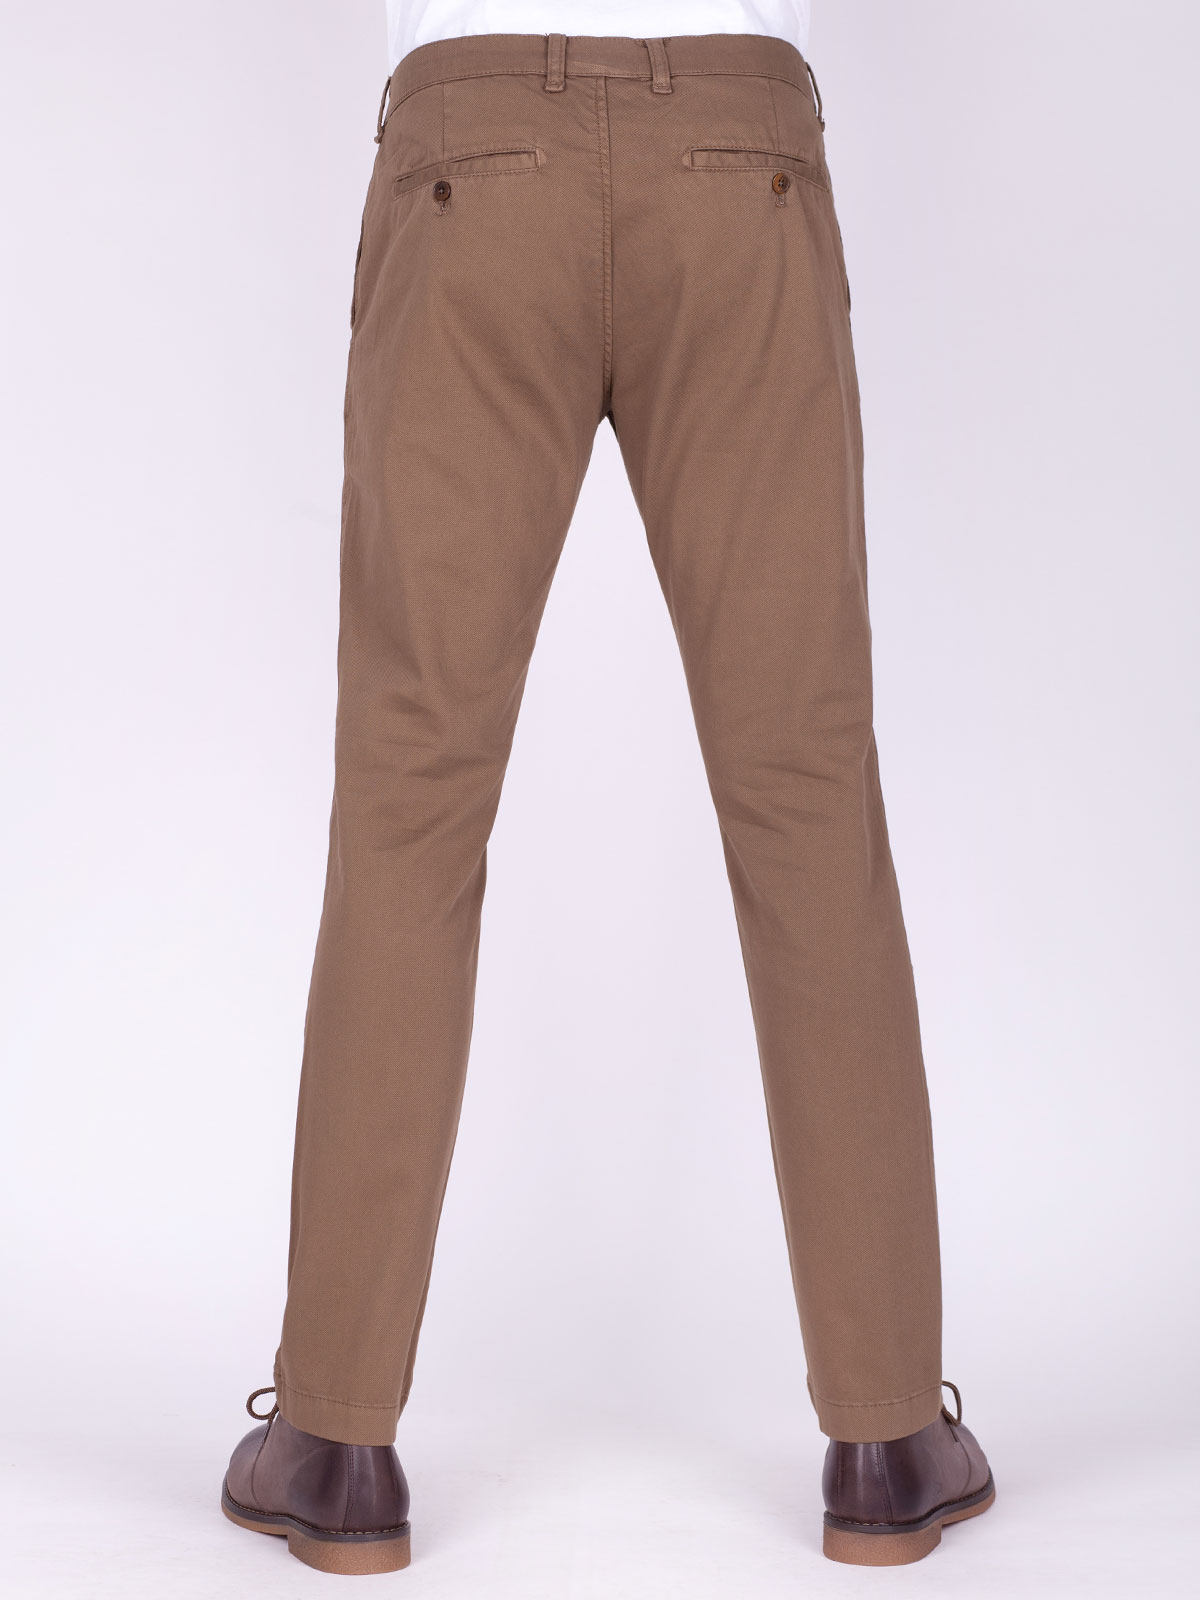 Fitted trousers in camel color - 60279 € 49.49 img3